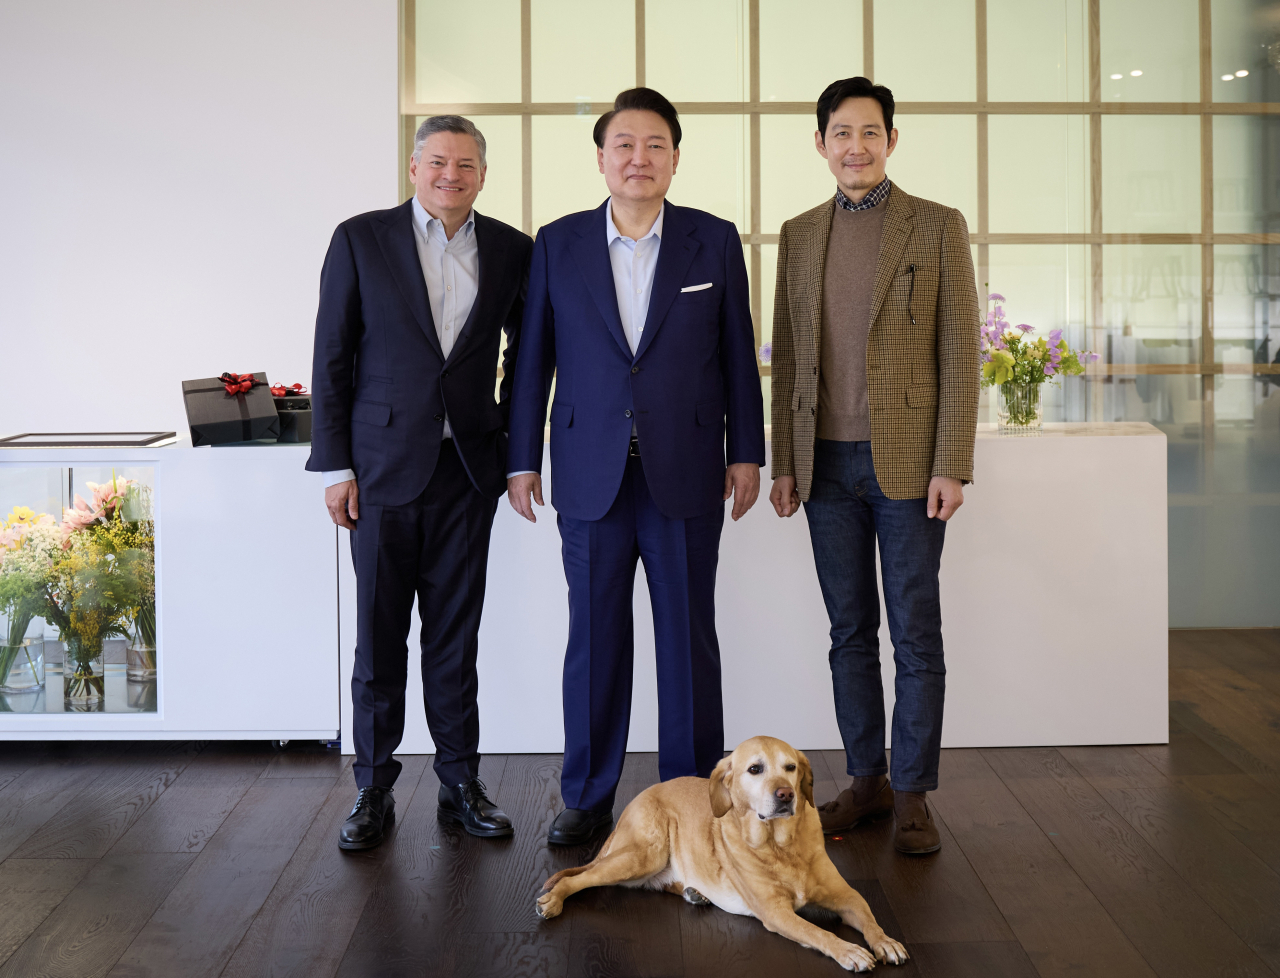 This photo, revealed Sunday, shows Netflix Chief Executive Officer Ted Sarandos (from left), President Yoon Suk Yeol and 